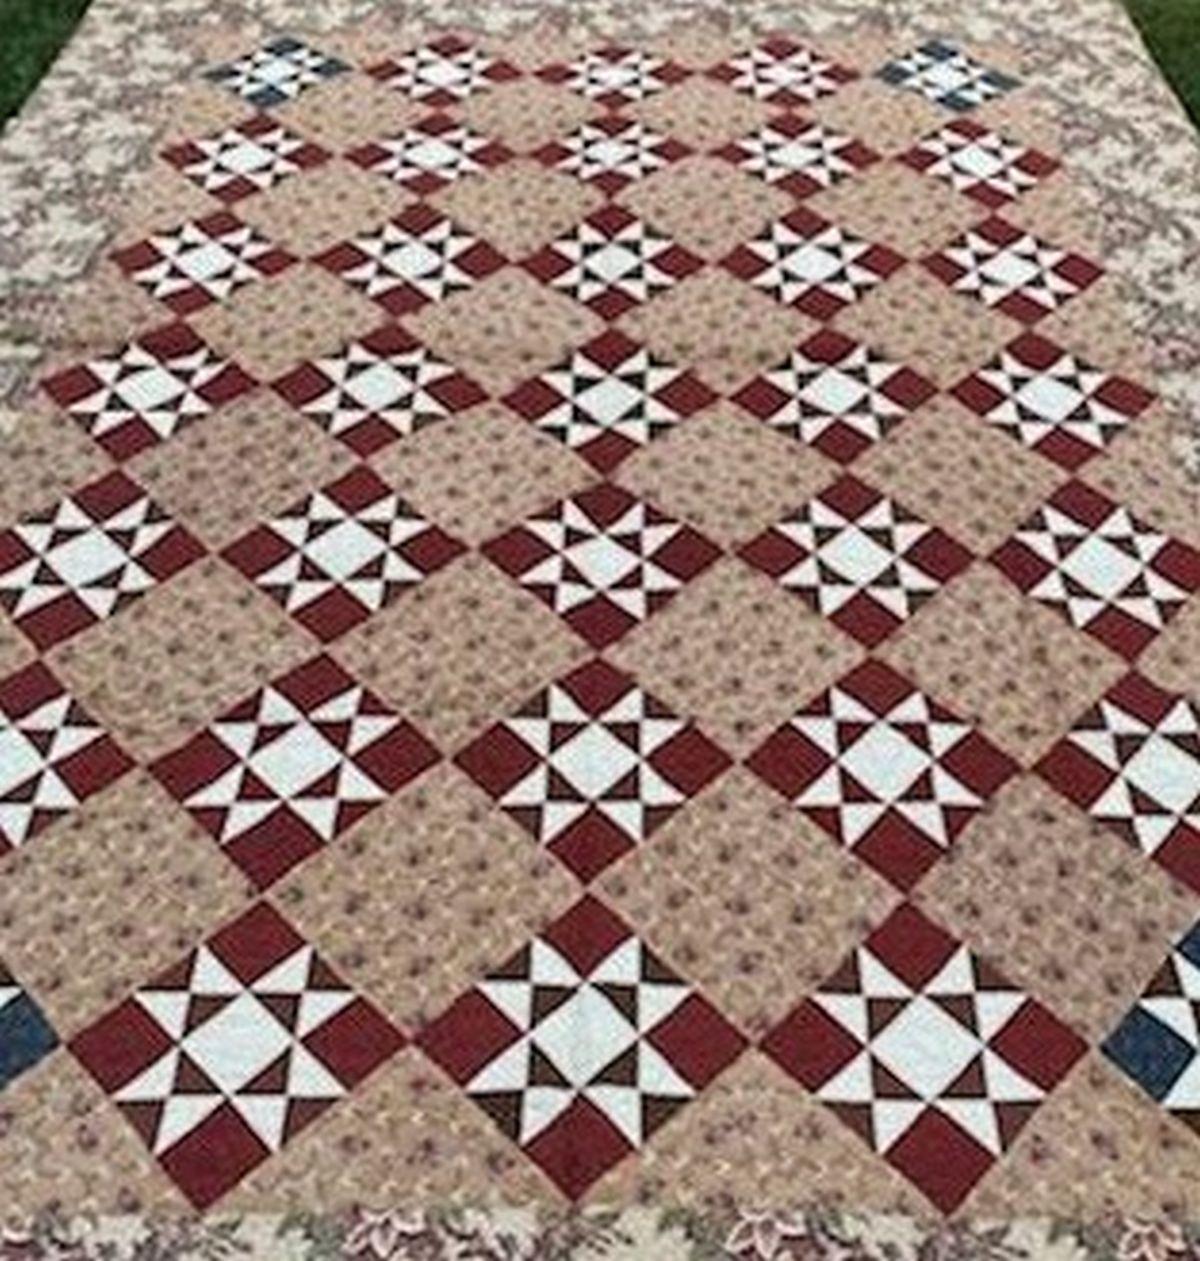 This fine eight point star quilt in early 1800s calico fabric has a beautiful rare chintz border. The border and the quilt are in pristine condition. This is a fine museum quality quilt. This quilt was from a private collection in Lancaster County,